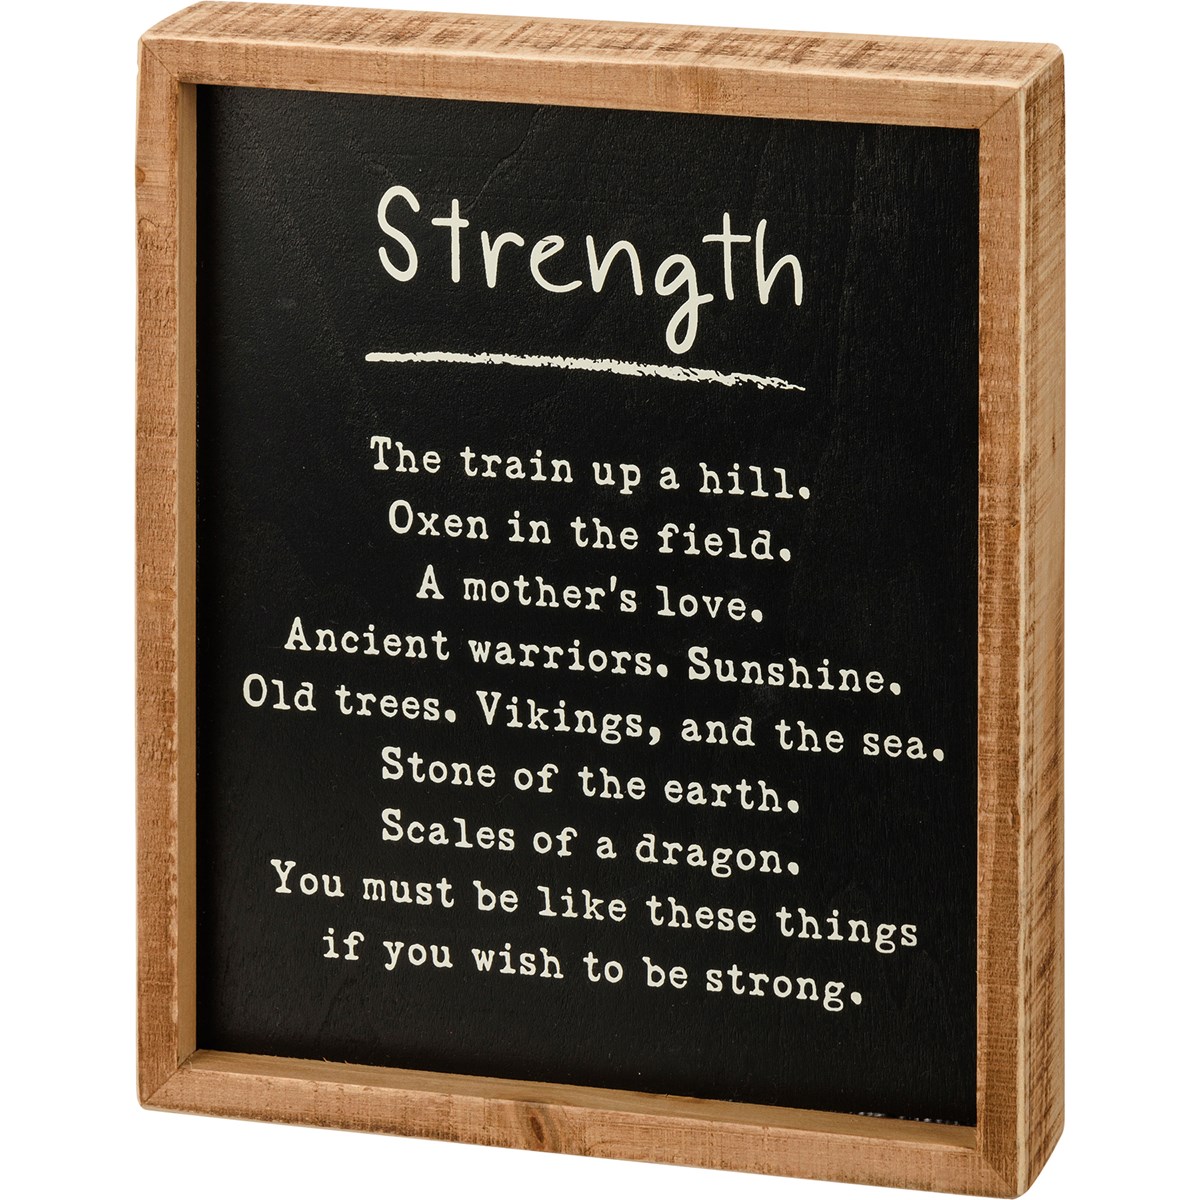 Strength Inset Box Sign - Wood